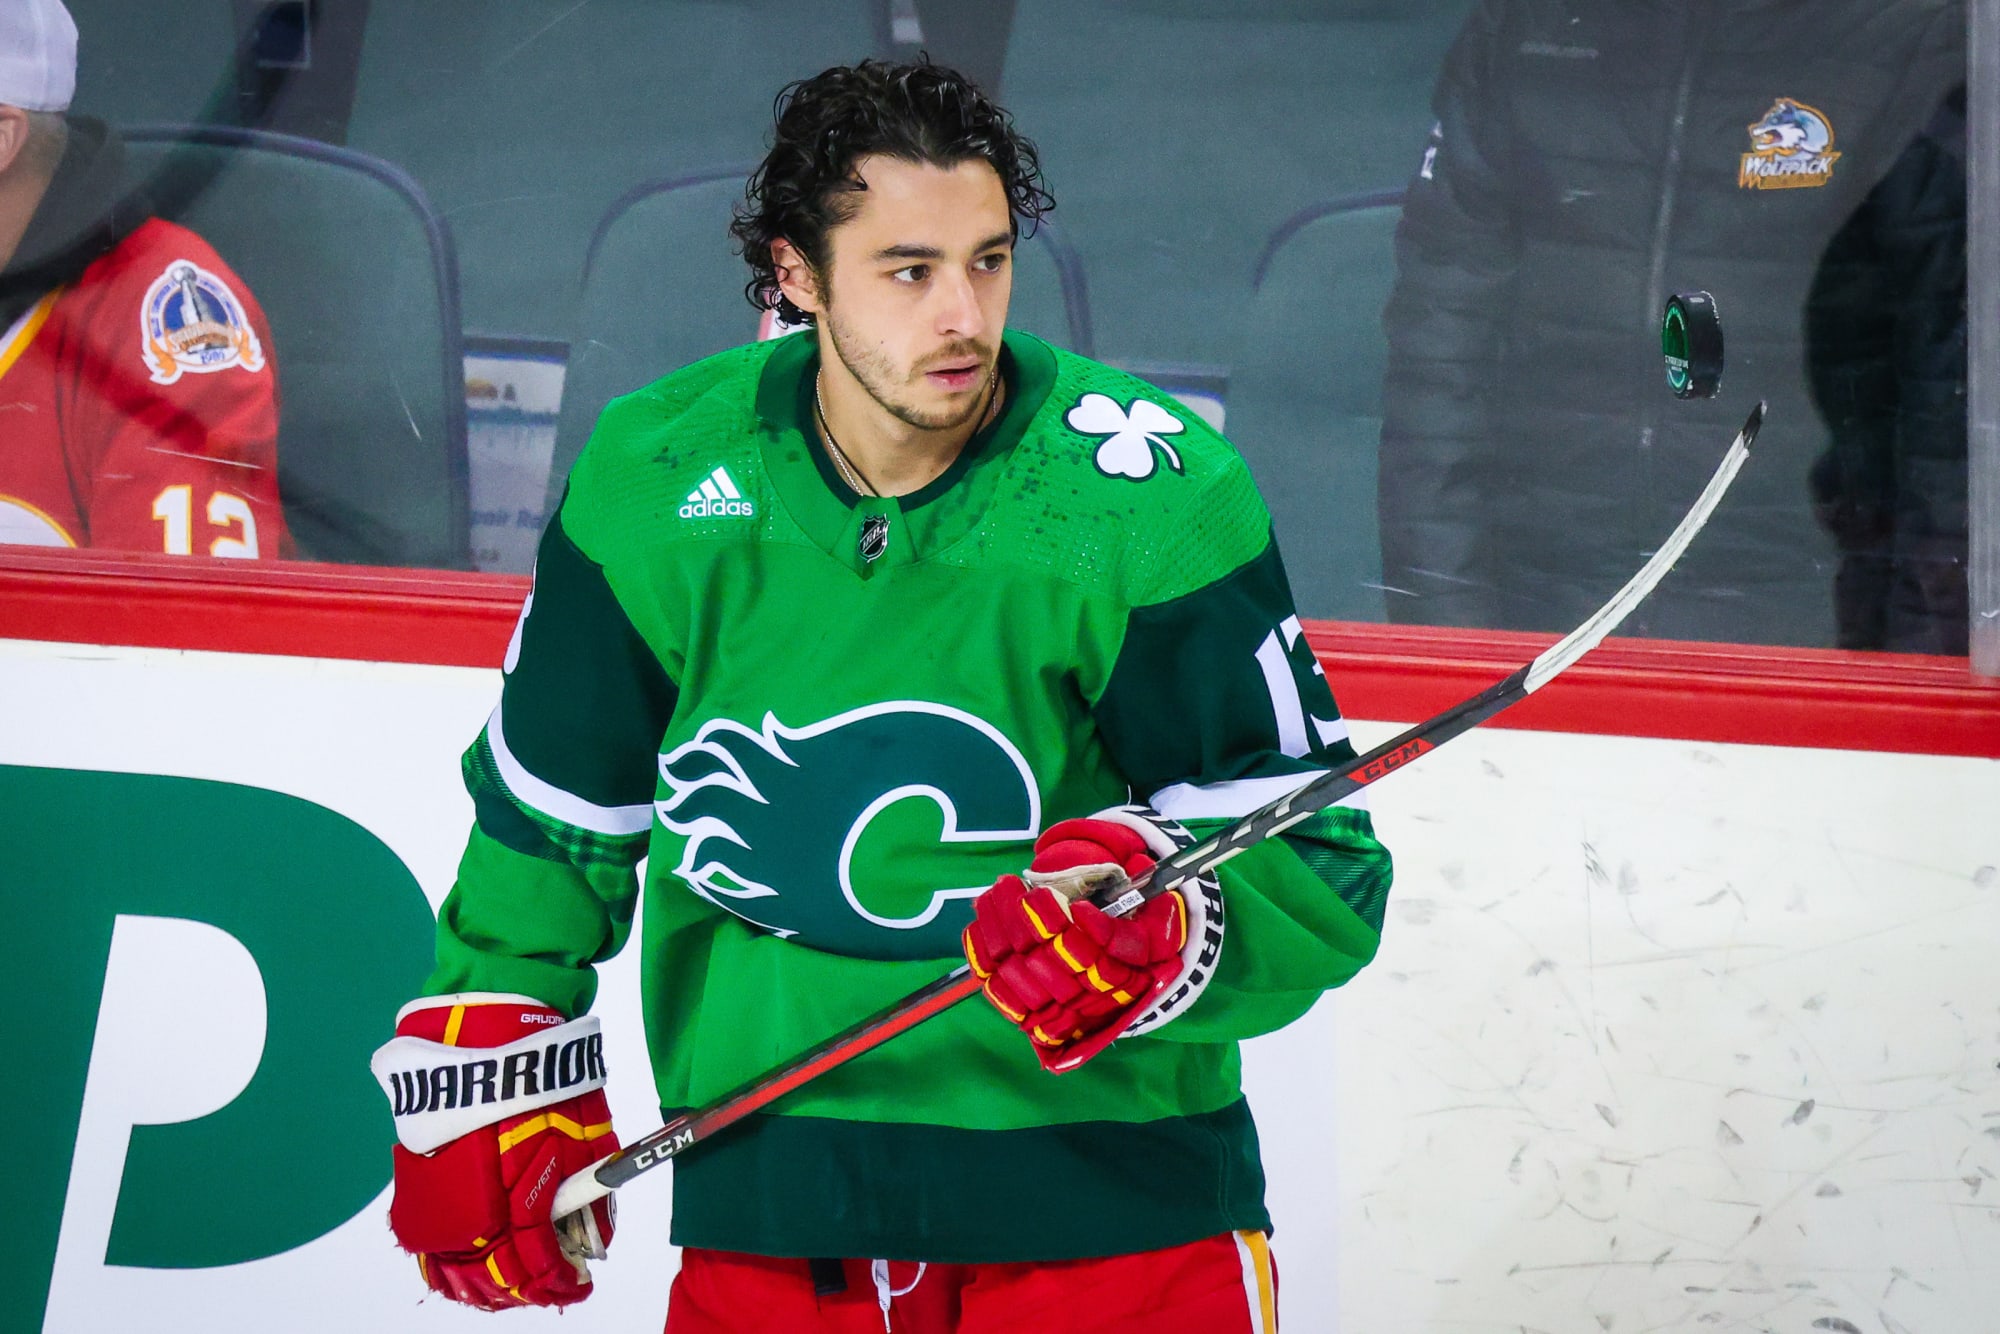 What If Johnny Gaudreau Chose New Jersey Devils Over Blue Jackets?